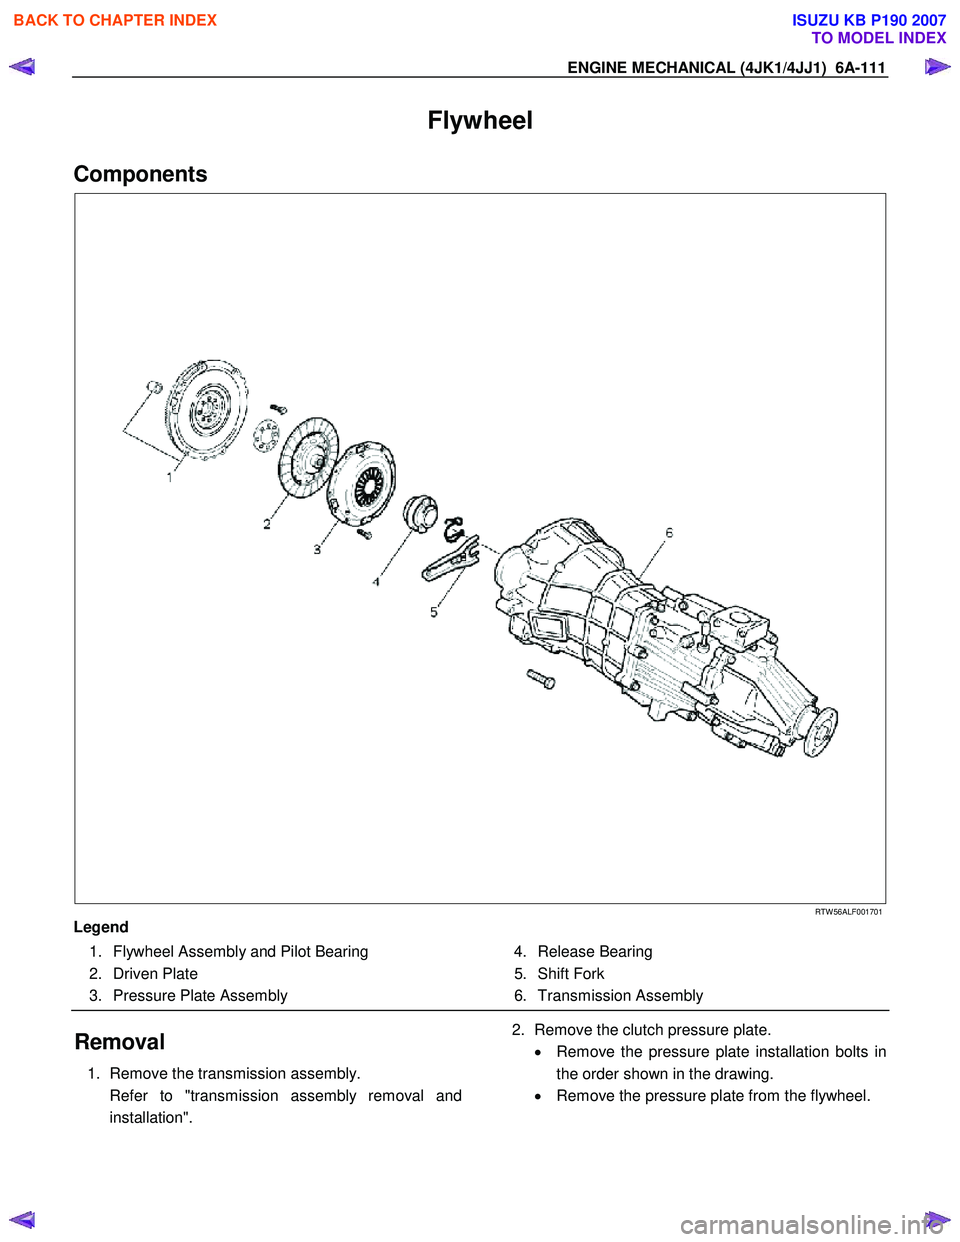 ISUZU KB P190 2007  Workshop Owners Guide ENGINE MECHANICAL (4JK1/4JJ1)  6A-111 
Flywheel 
Components 
   
 
 
 
 
 
 
 
 
 
 
RTW 56ALF001701 
Legend   1.  Flywheel Assembly and Pilot Bearing  
 2. Driven Plate 
  3.  Pressure Plate Assembly